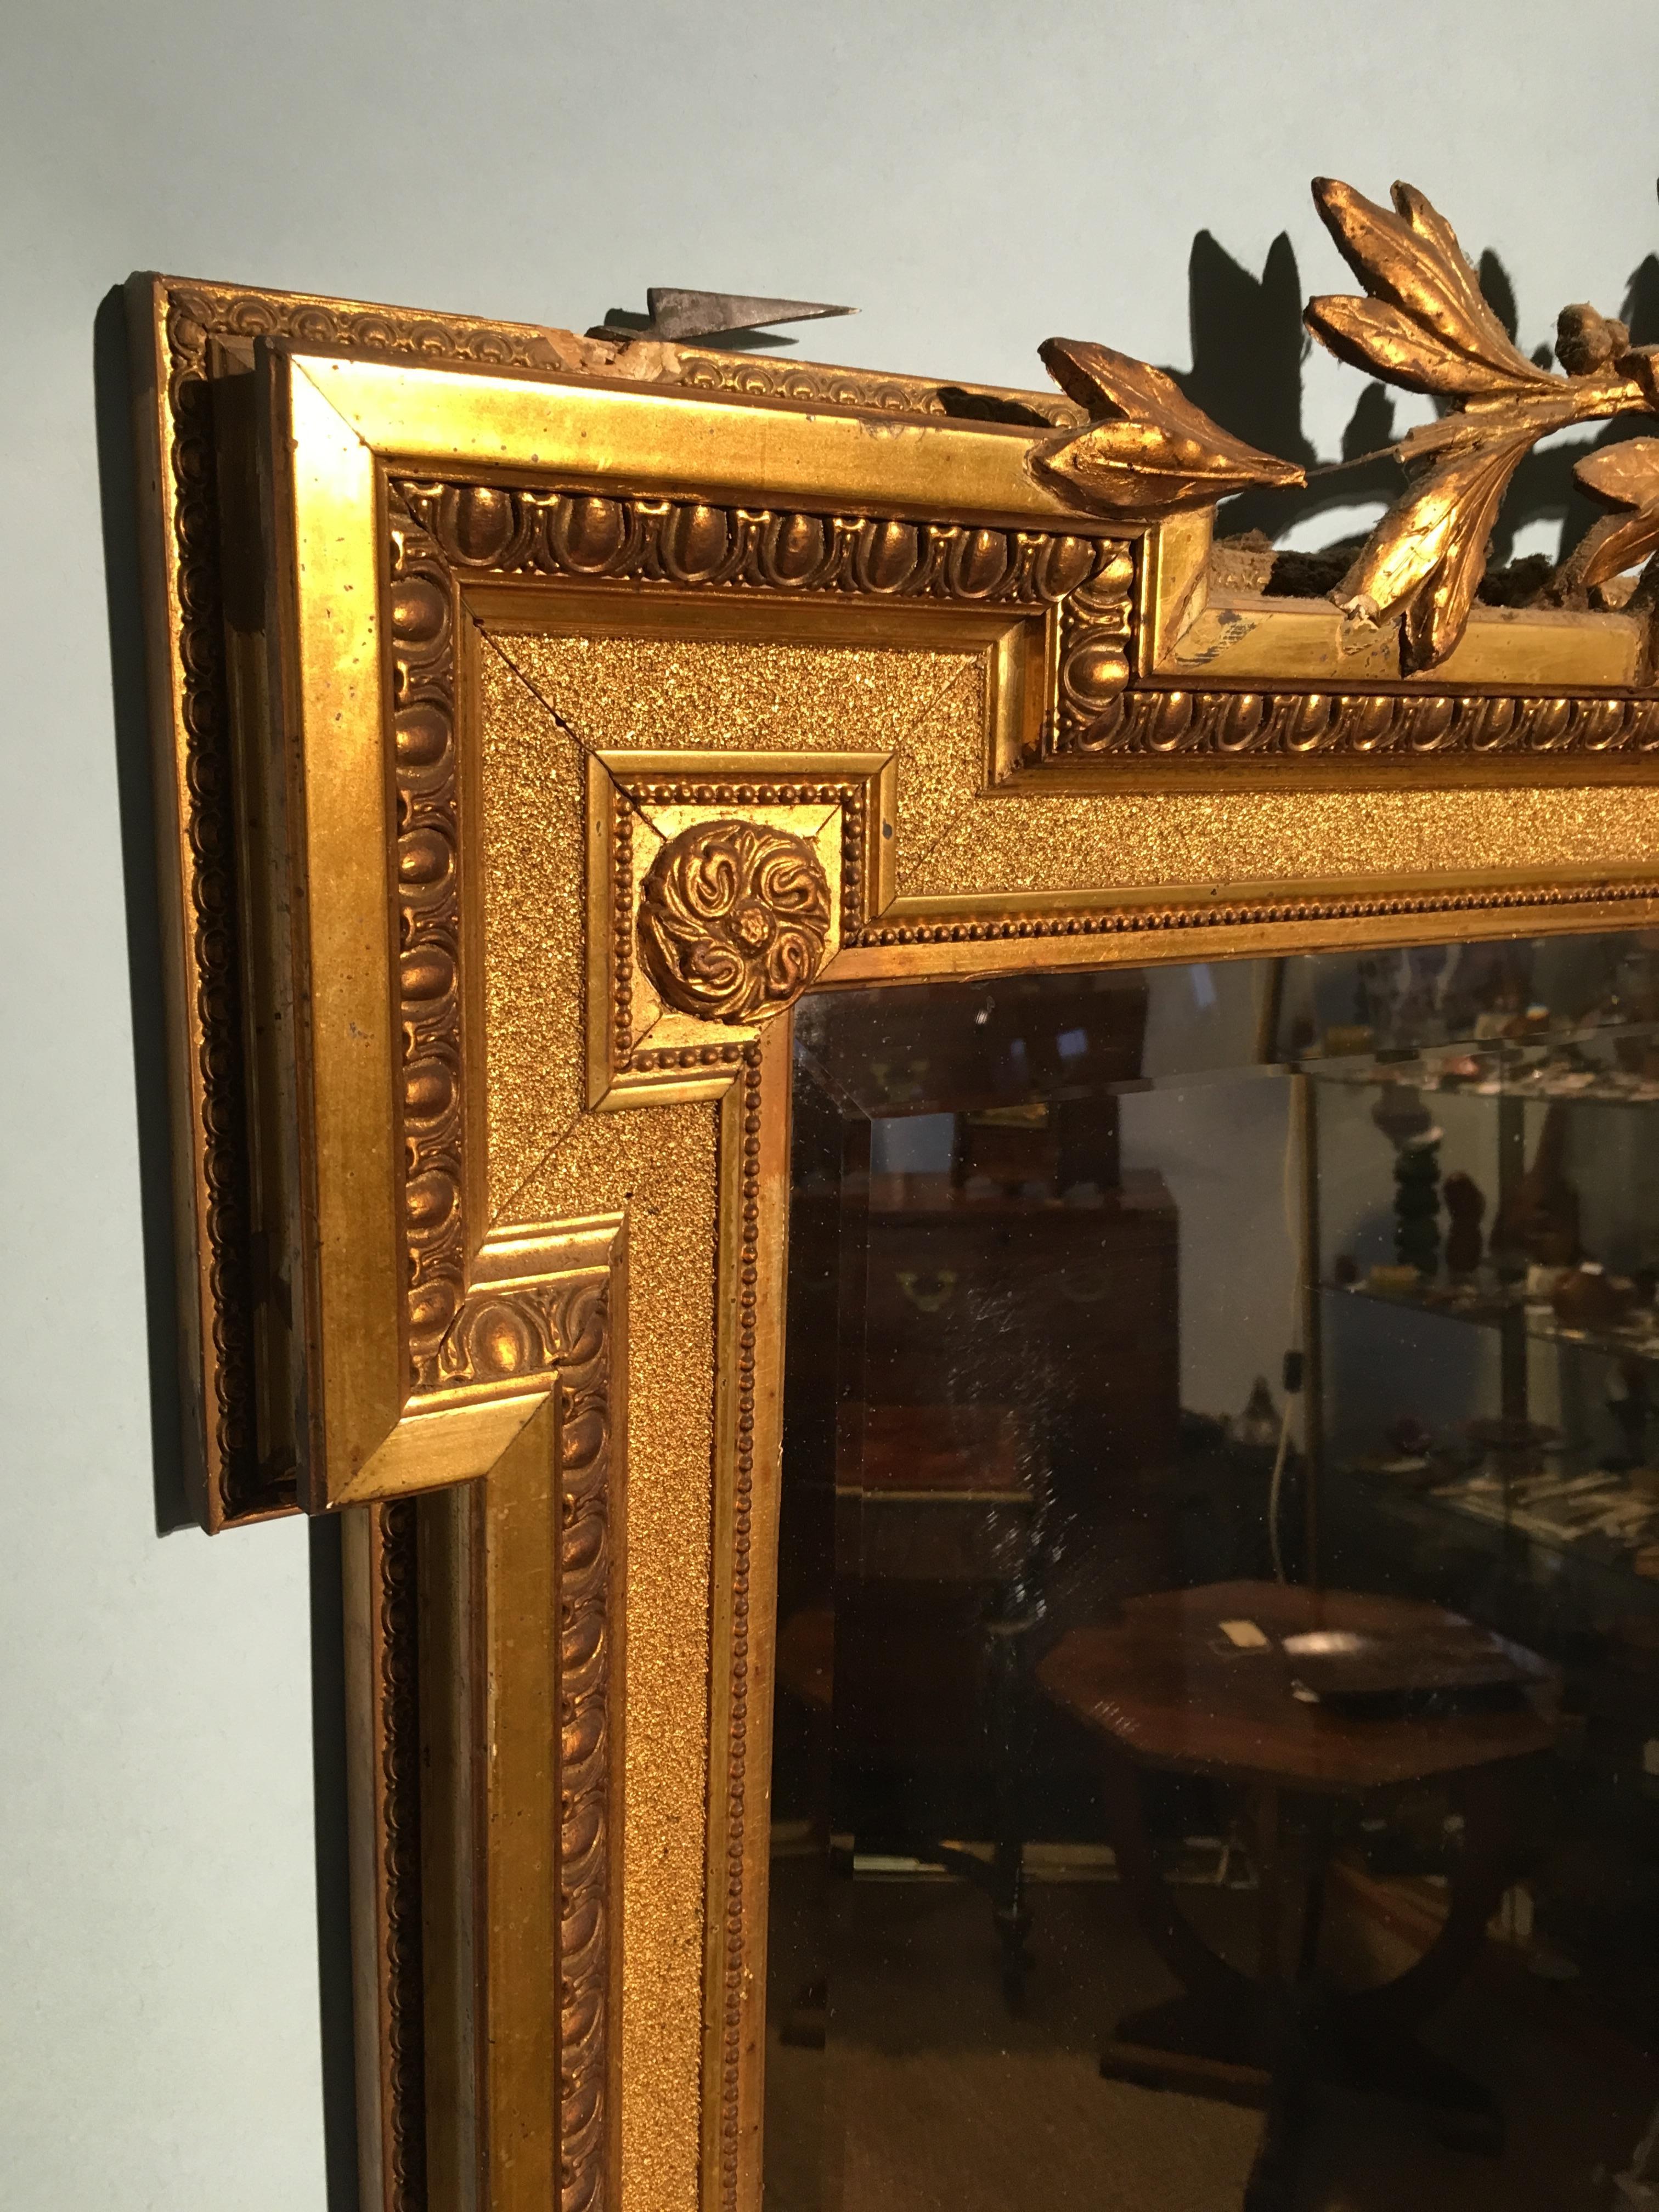 Late 19th century gilt mirror
French, circa 1890s with original bevelled glass and pine back boards
Little bit of damage to the cresting
Measures: Height 69 inches or 177 cms
Width 41 inches or 105 cms.